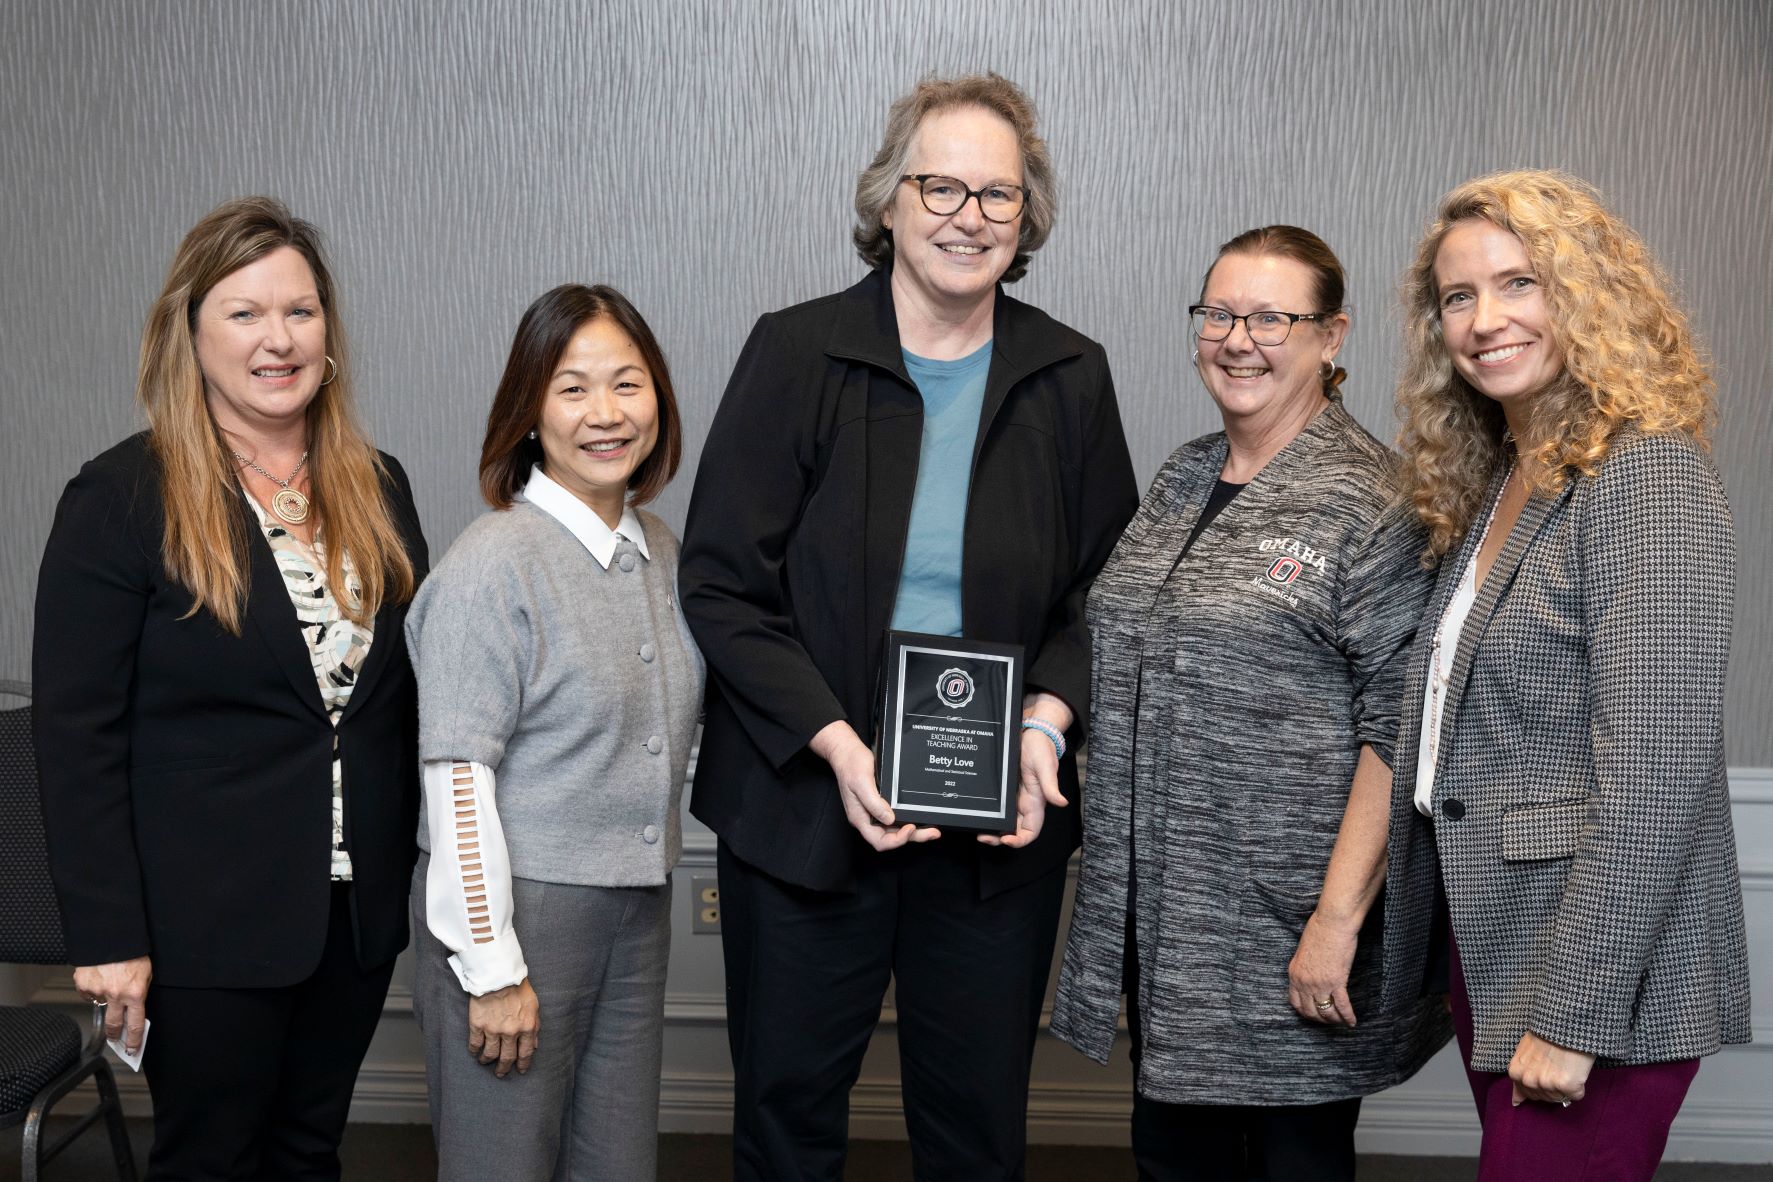 Assistant Vice Chancellor for Faculty Affairs Candice Batton (left), Chancellor Joanne Li, Betty Love (Excellence in Teaching Award recipient), Interim Senior Vice Chancellor for Academic Affairs Deborah Smith-Howell, and Interim Dean Melanie Bloom. Betty love holds her award plaque.